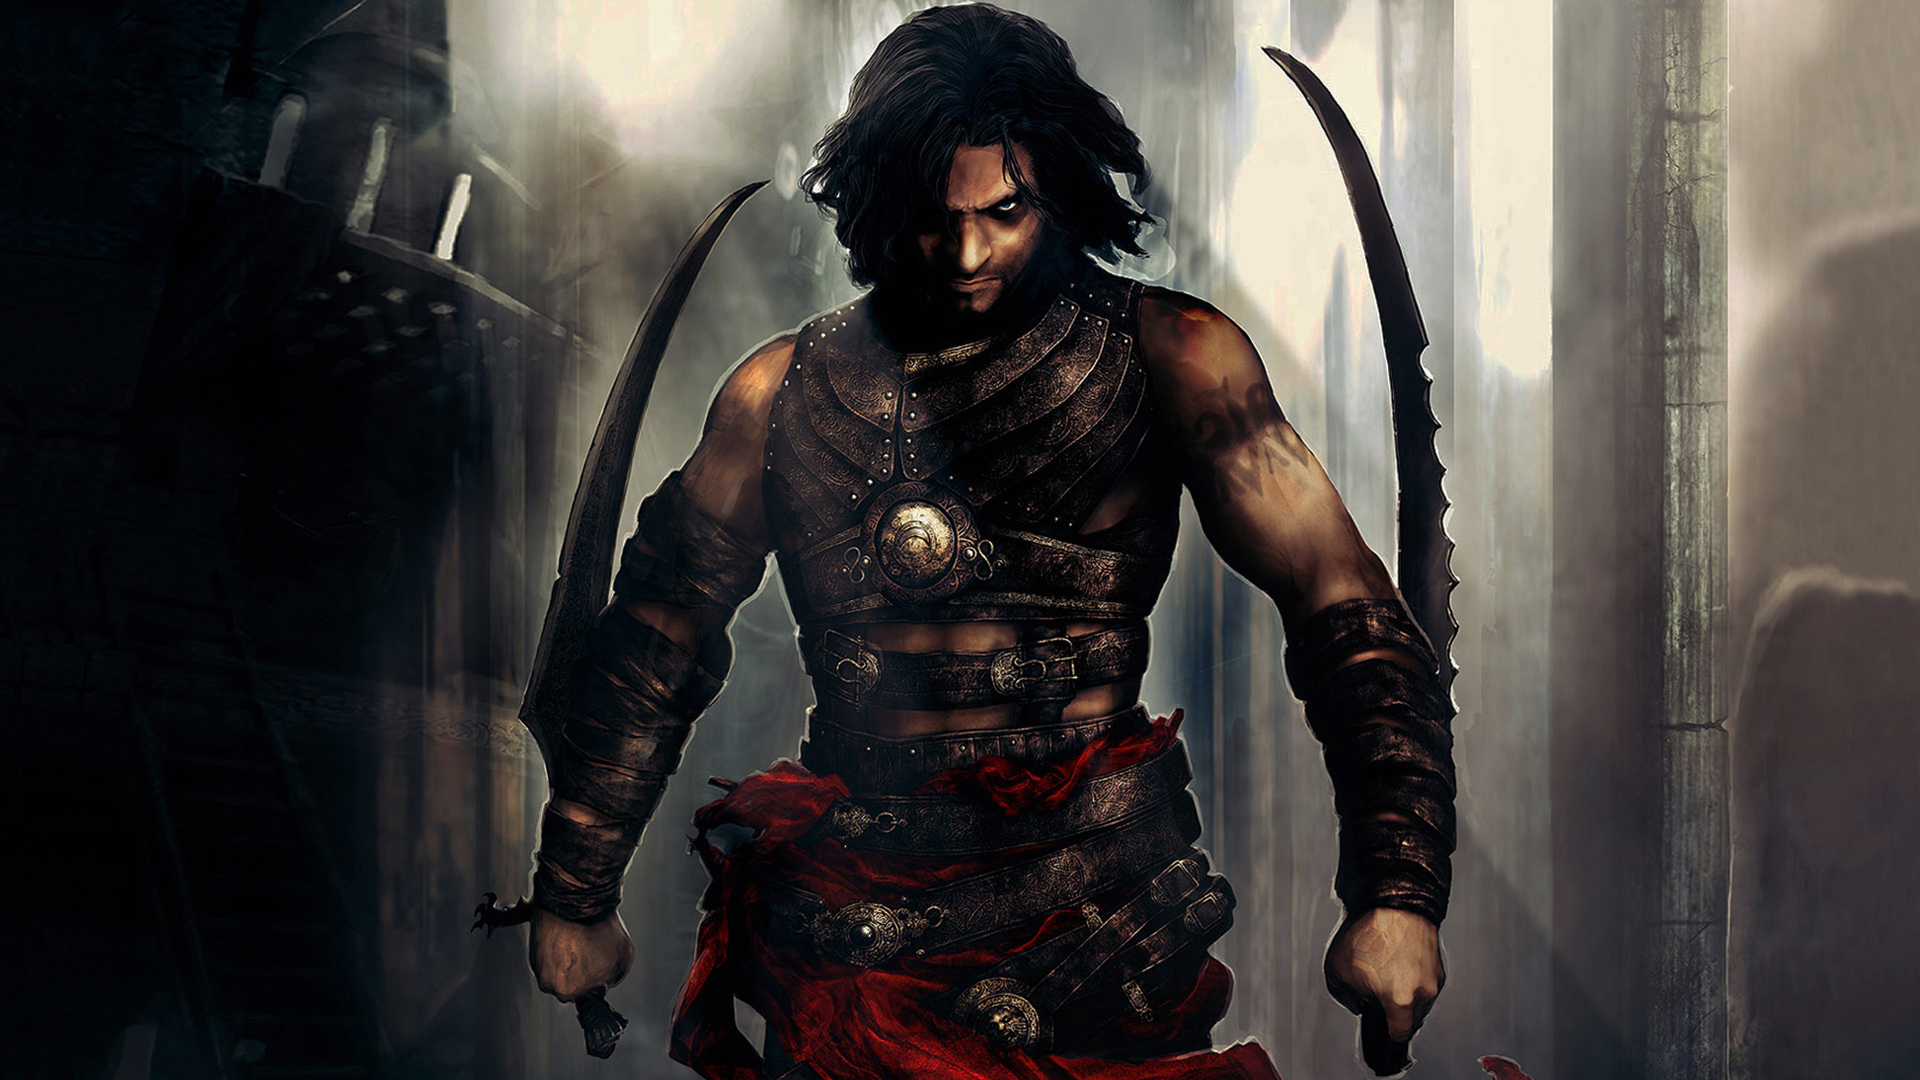 warrior, prince of persia, prince of persia: warrior within, video game, sword